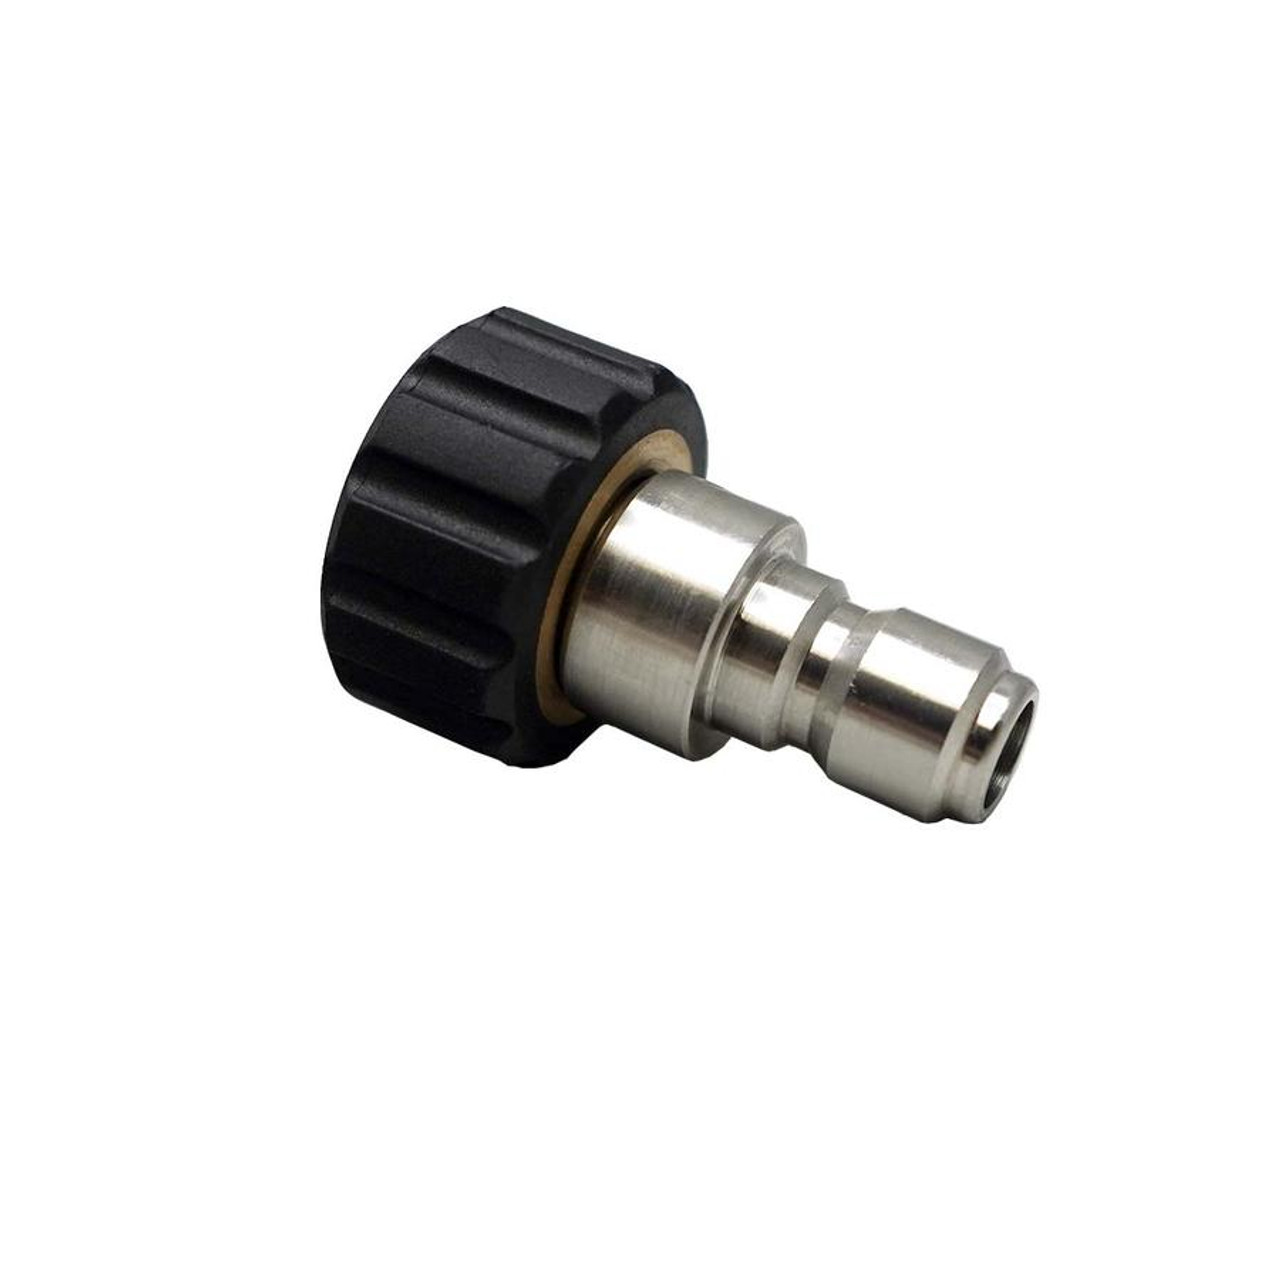 3/8" Female Quick Connect Coupler x M22 Twist Connector for Pressure Washer 14mm 